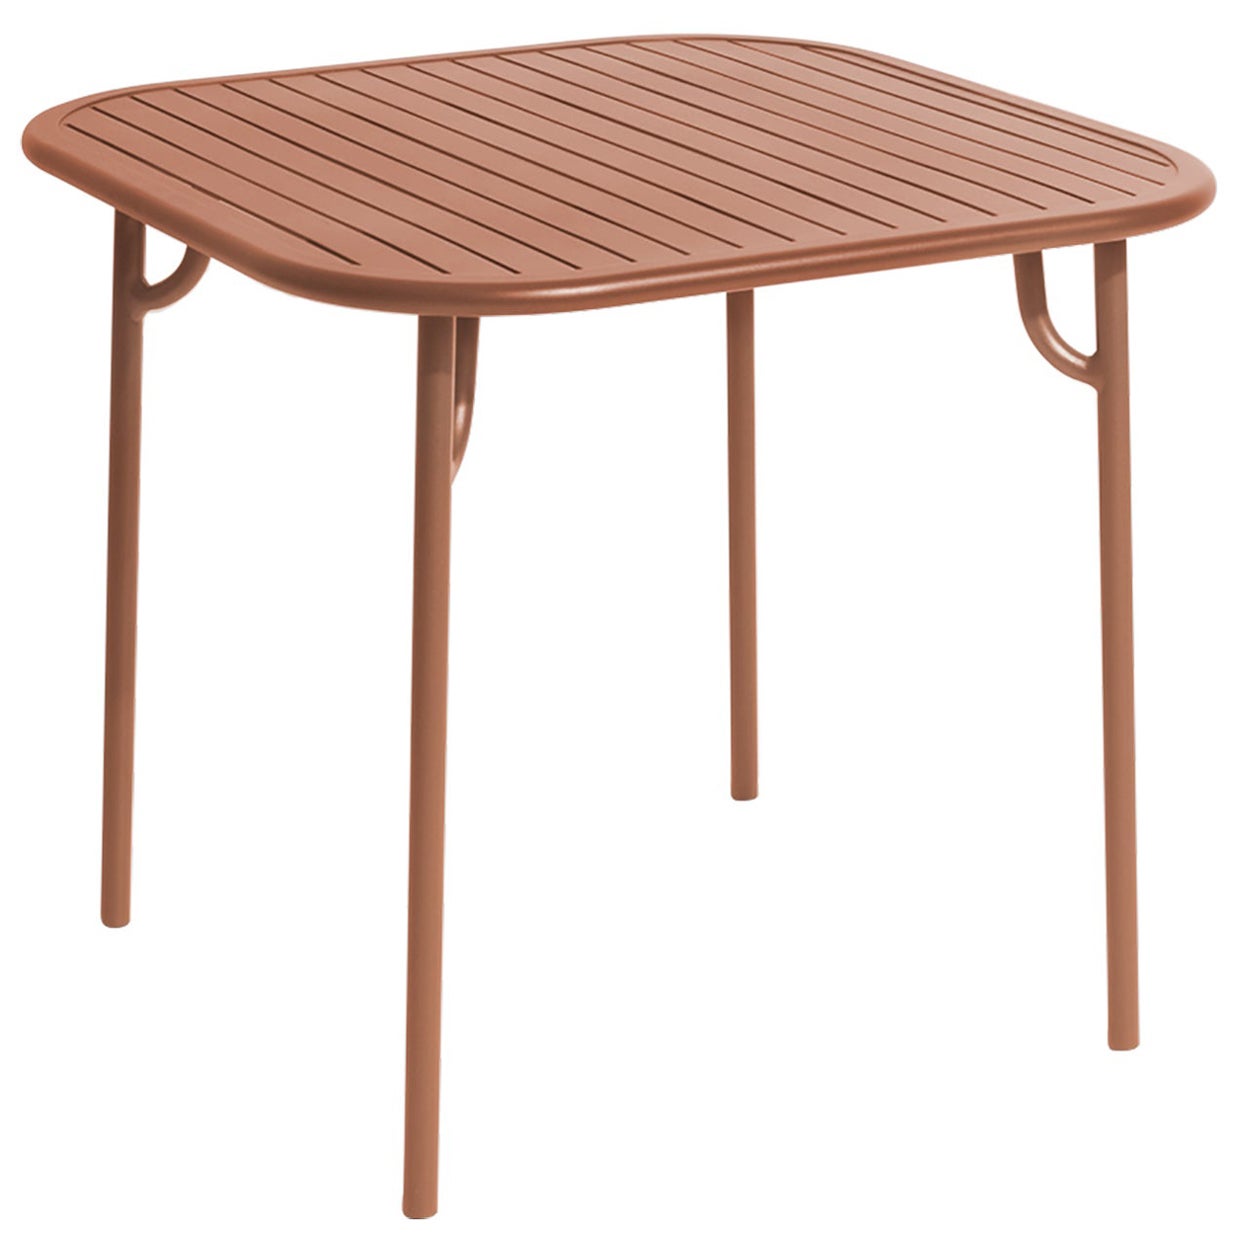 Petite Friture Week-End Square Dining Table in Terracotta Aluminium with Slats